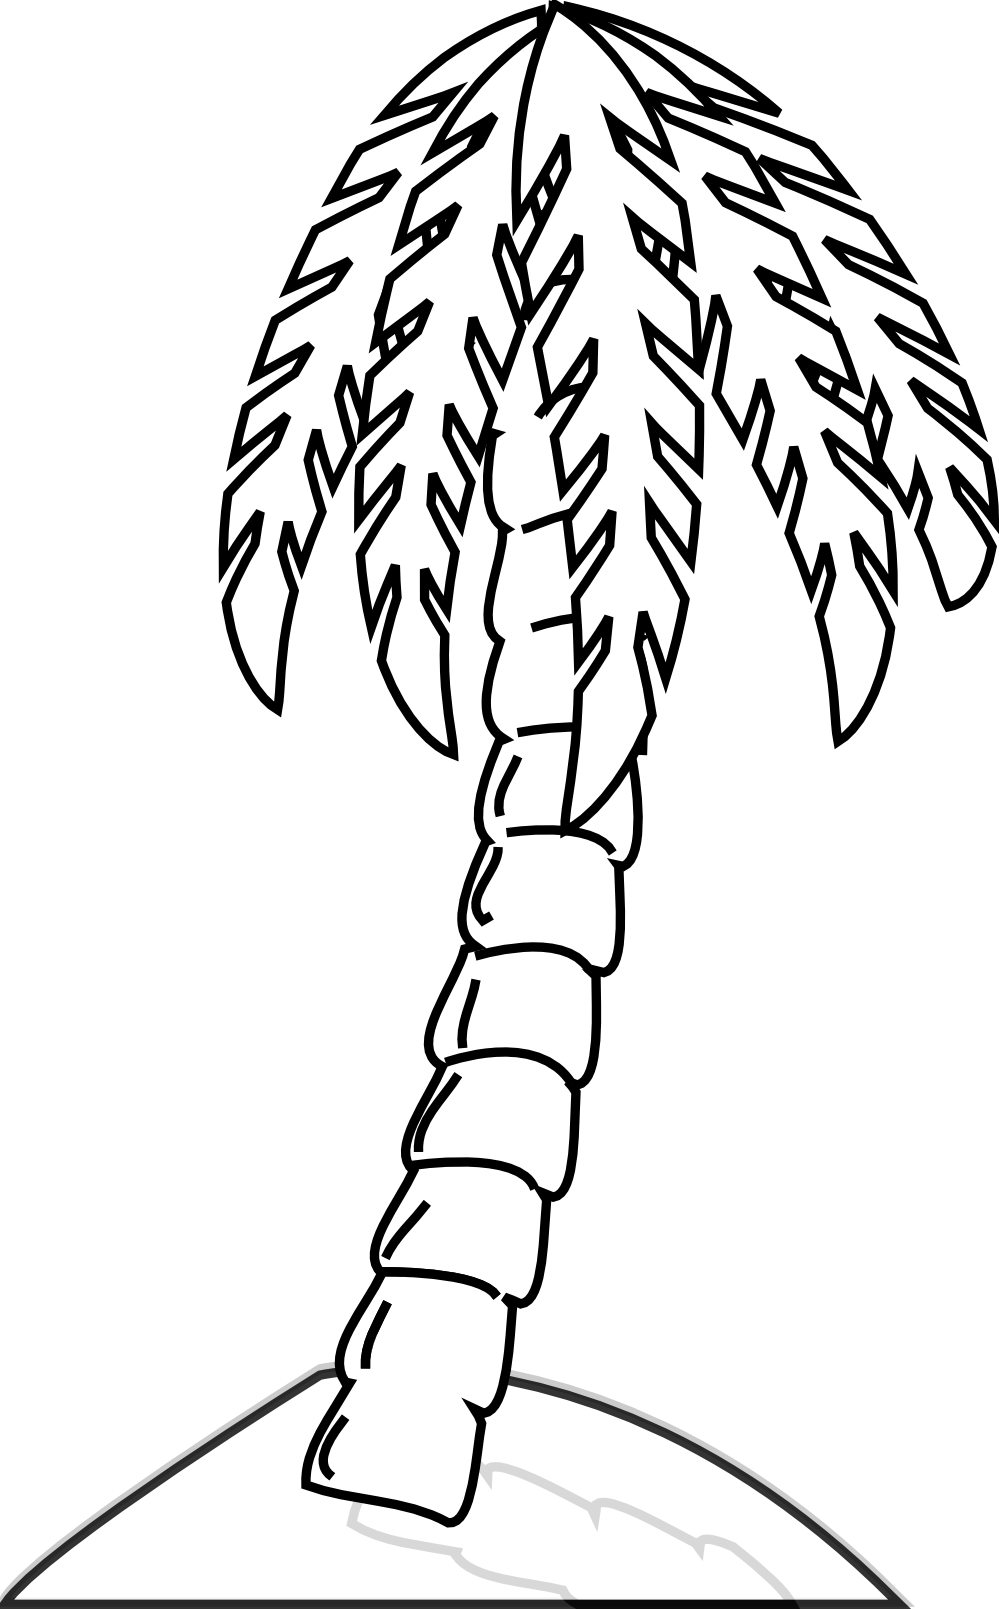 Free Line Art Tree, Download Free Line Art Tree png images, Free